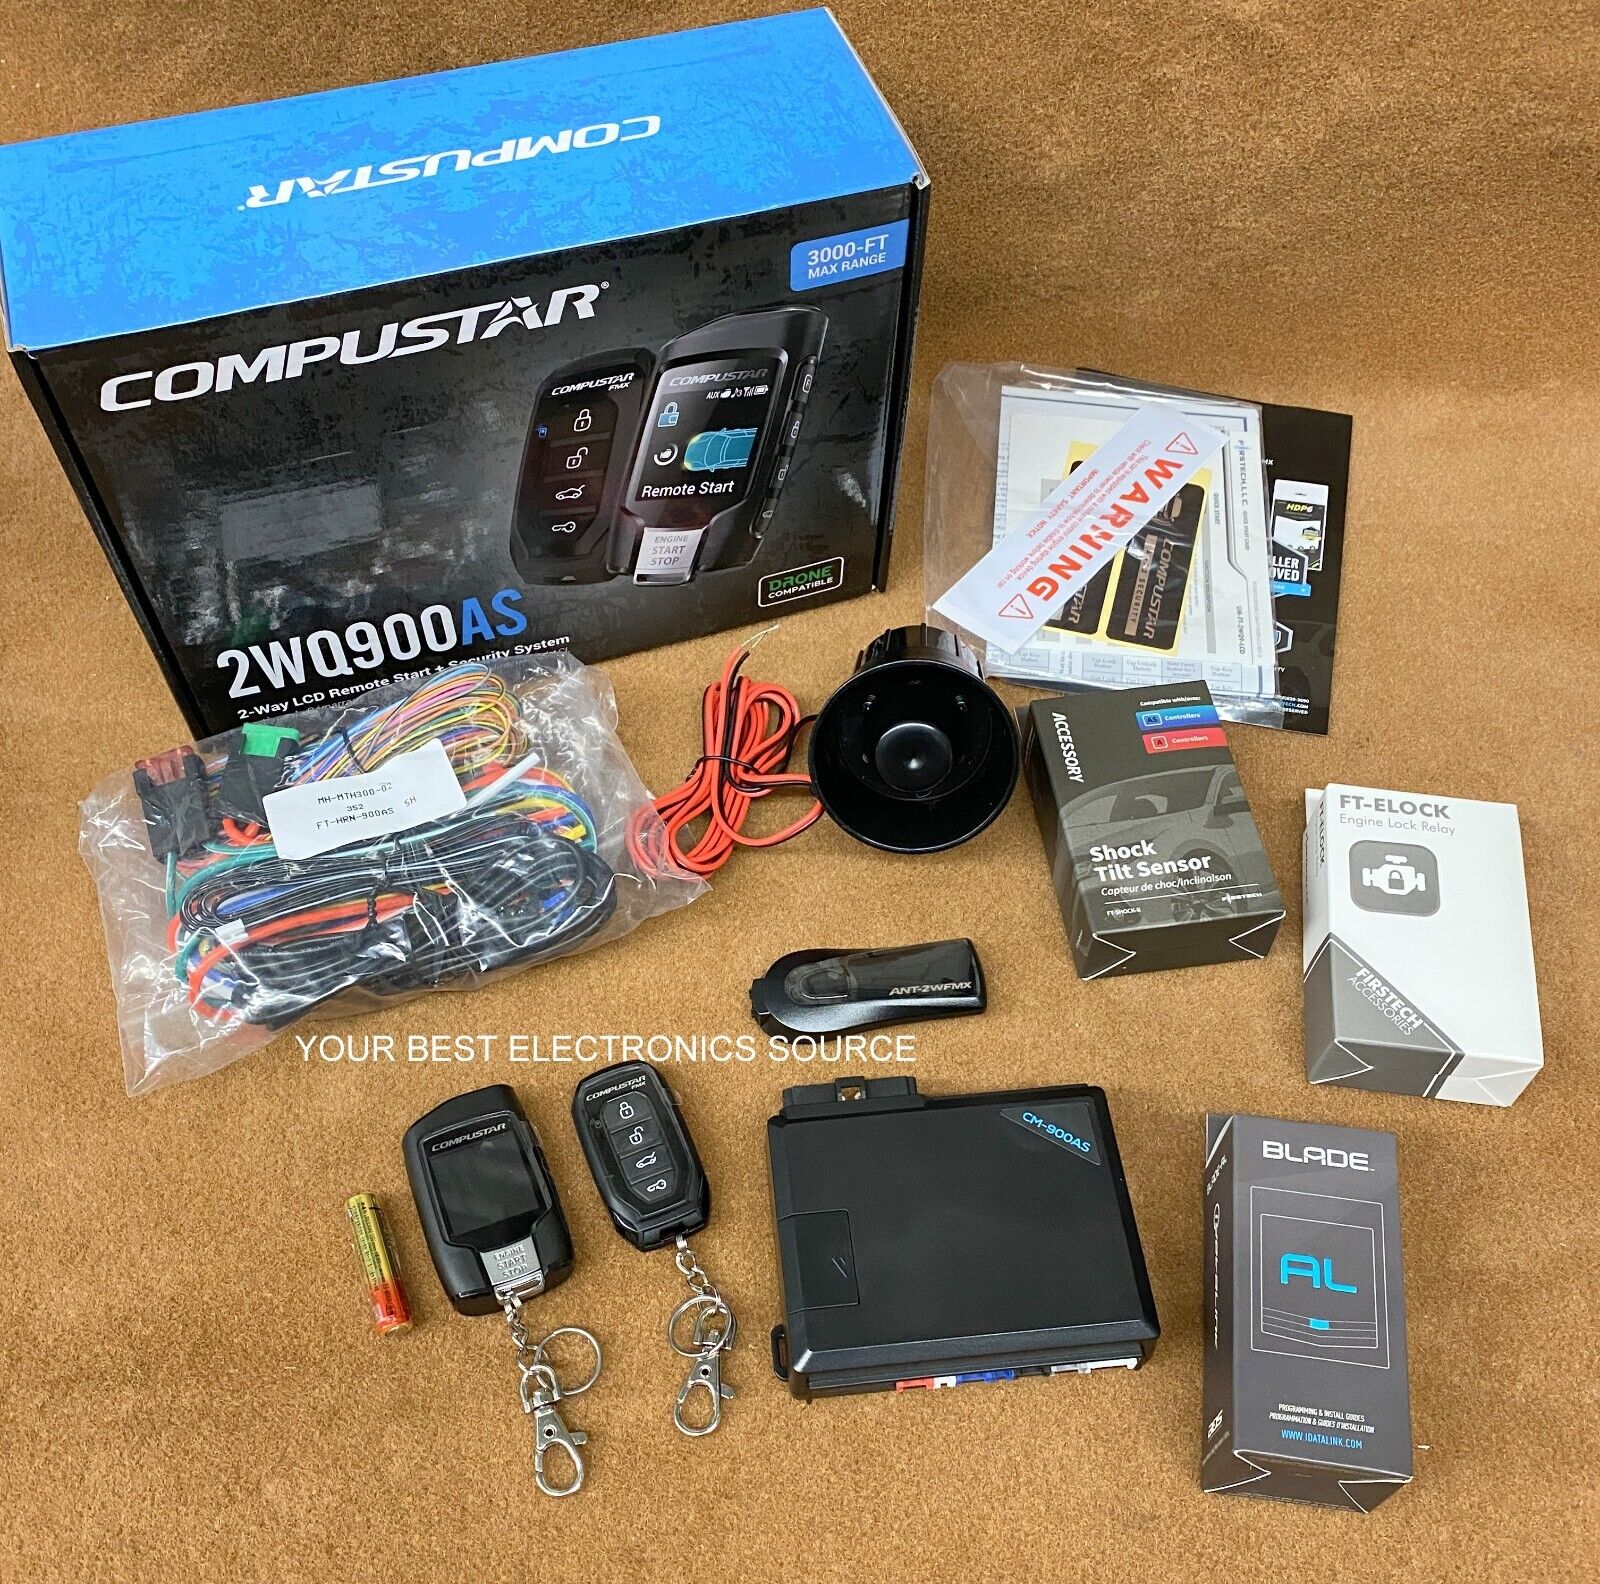 NEW Compustar CS2WQ900-AS, 2-Way Remote Start/Security System, Includes BLADE-AL